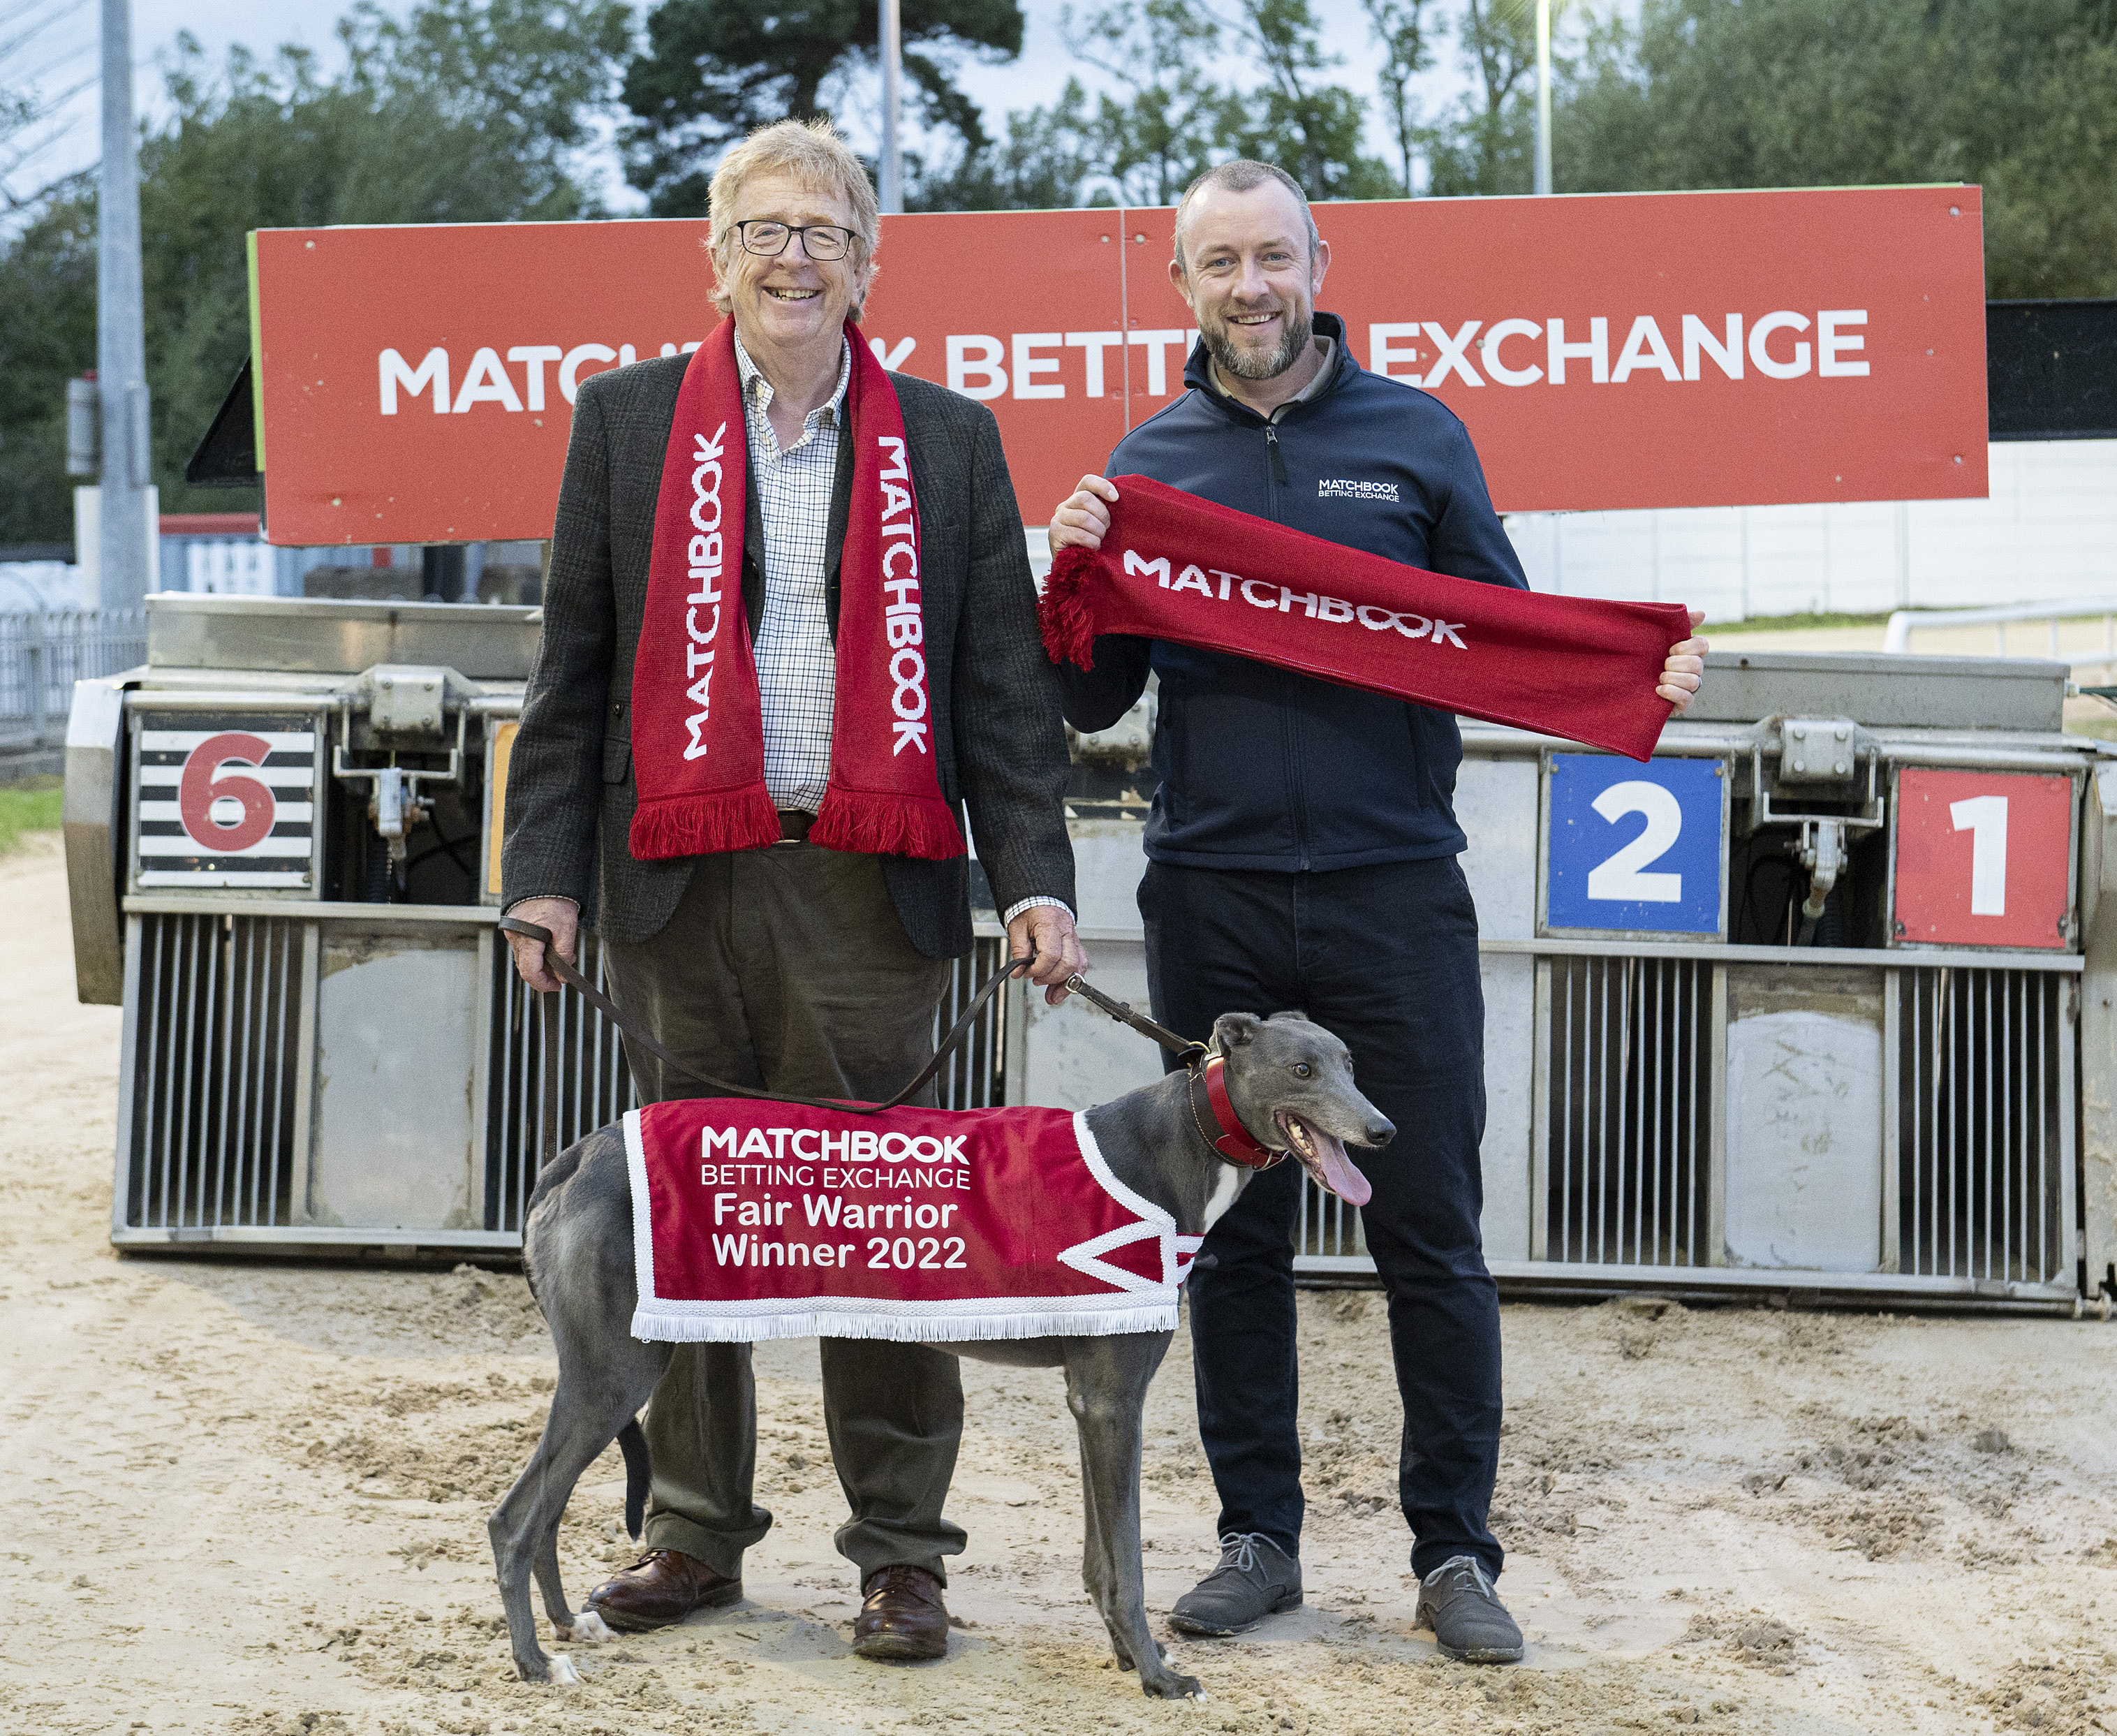 Frank Nyhan, Chairman of Greyhound Racing Ireland, pictured with Paul Geasley, Brand Manager of Matchbook Betting Exchange, and retired Greyhound Setella, to launch the Matchbook Betting Echange sponsorship of the Fair Warrior in Mullingar Greyhound Stadium